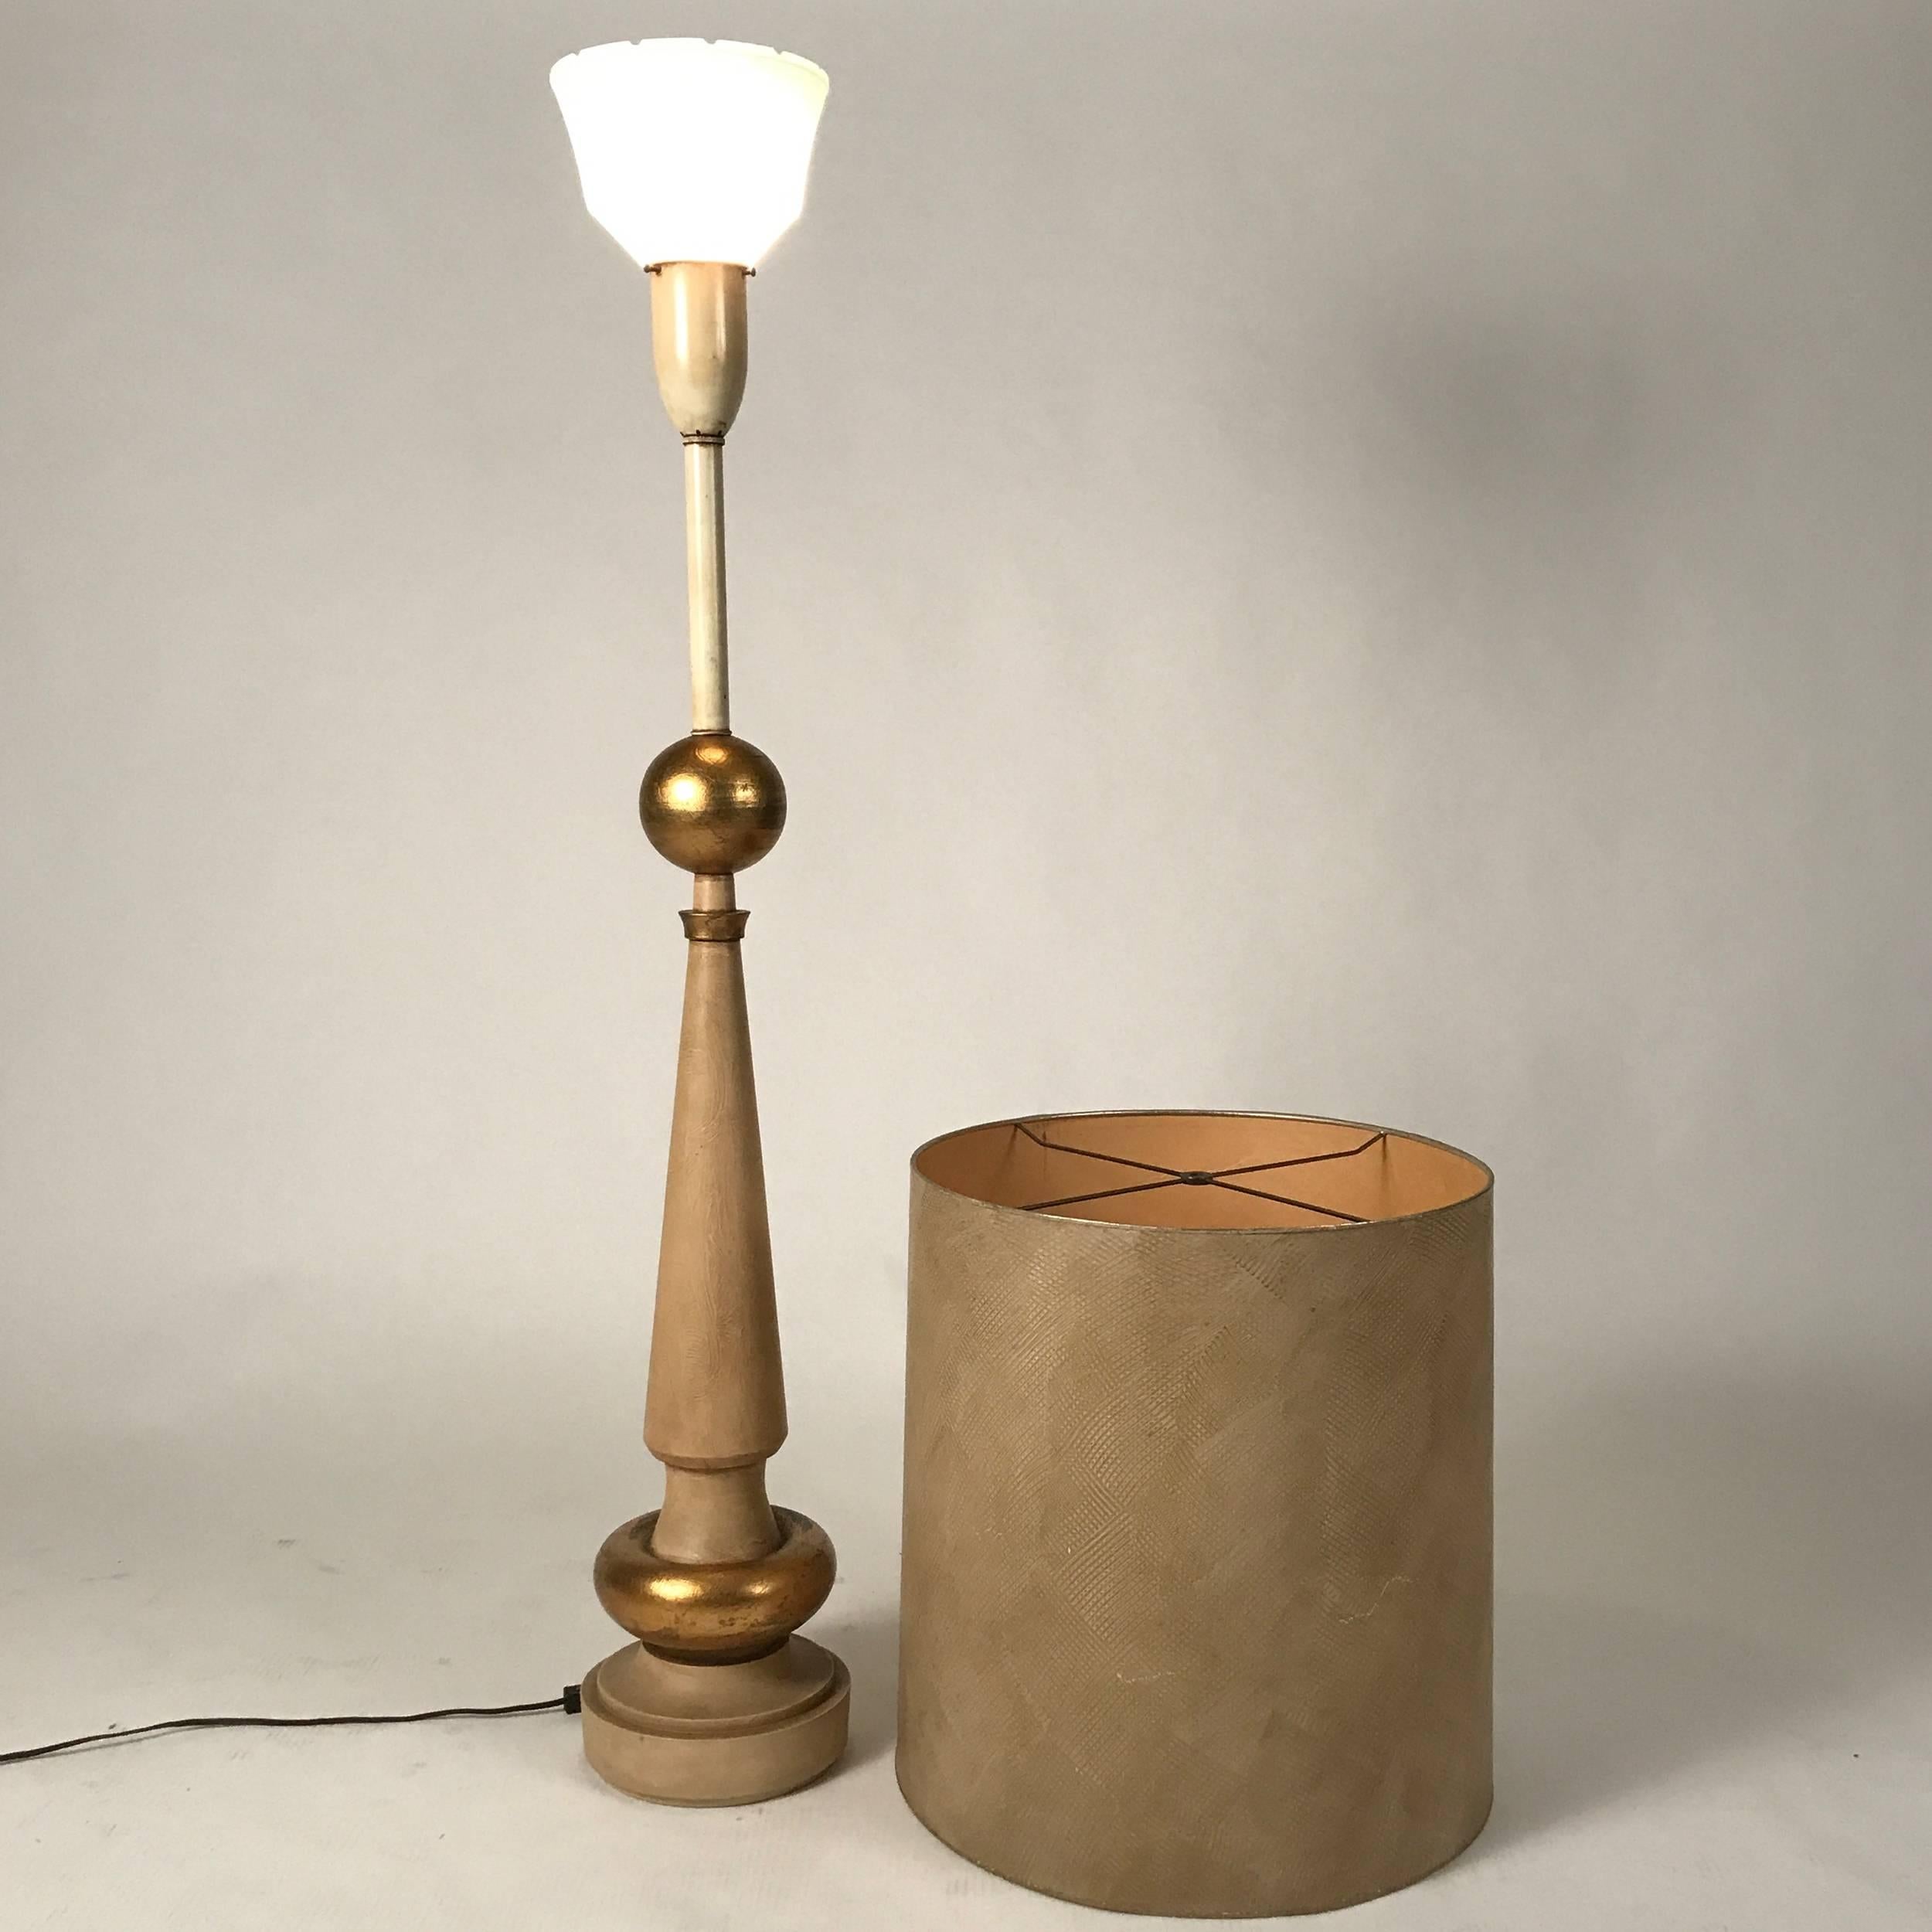 American Monumental 1950s Regency Torchiere Lamp in the Manner of James Mont